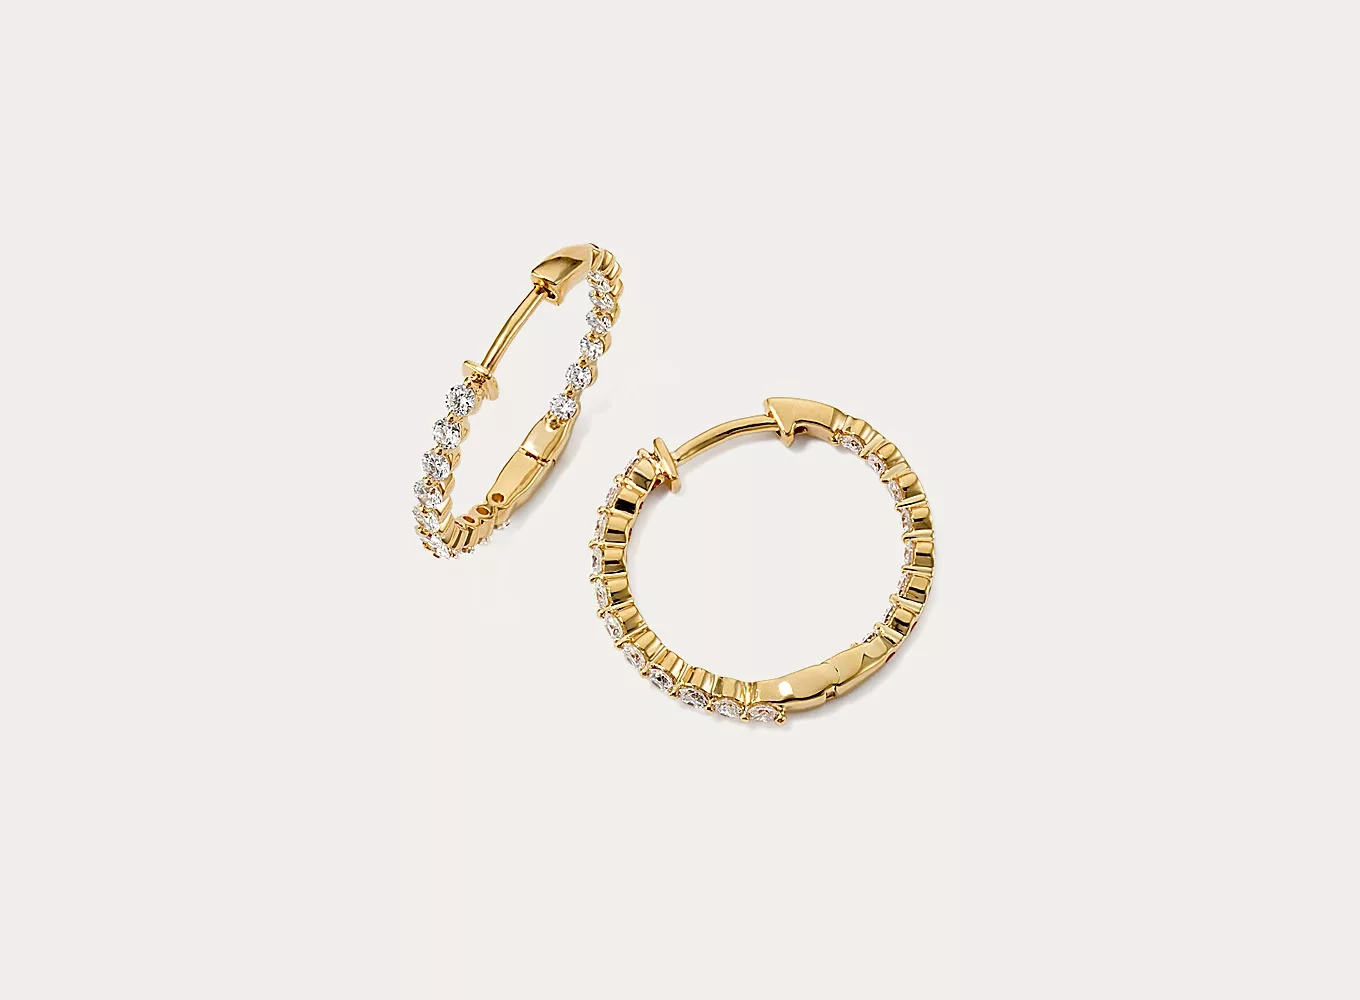 Lucia Inside-Out 1 tcw Lab-Grown Diamond Hoops The inside-out design of these hoop earrings features lab-grown diamonds along the front and along the inside back for maximum sparkle. Their beautiful 14-karat yellow gold setting highlights each diamond’s round shape.